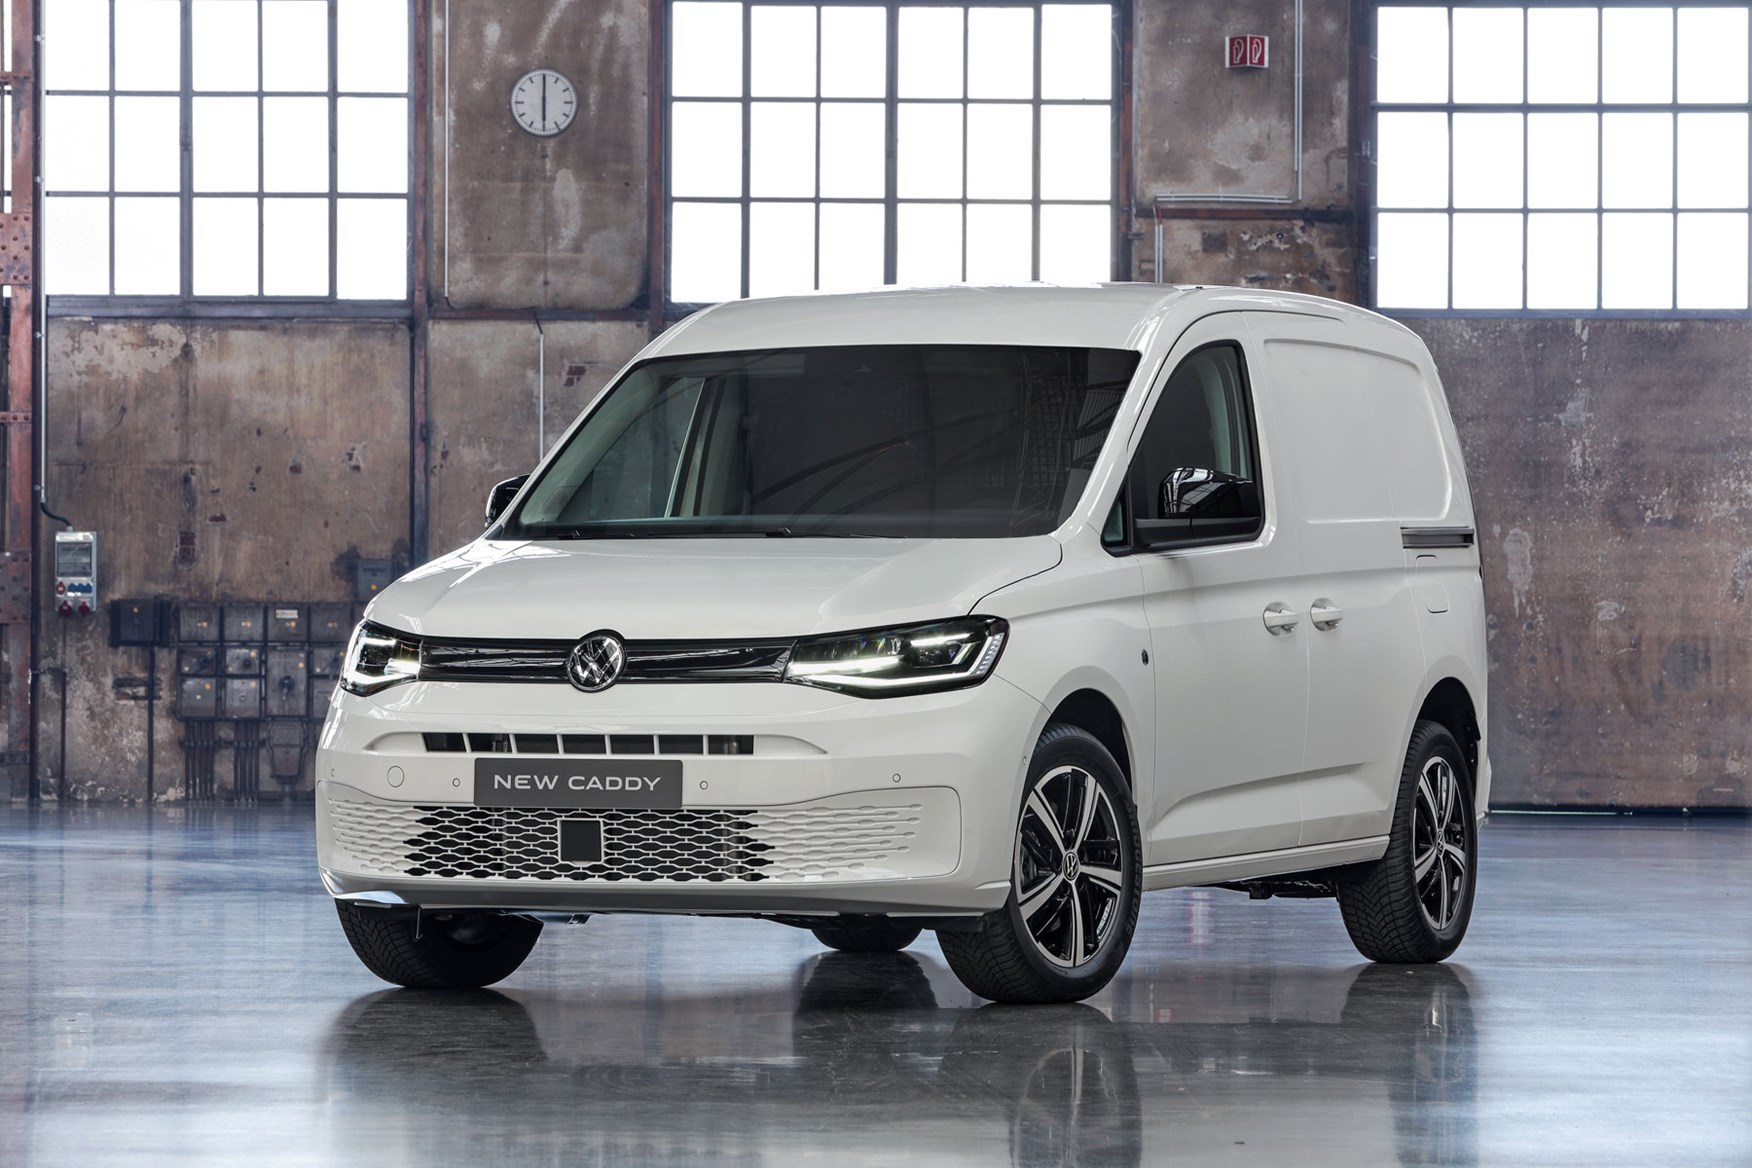 The VW Caddy Black Edition at The CV Show